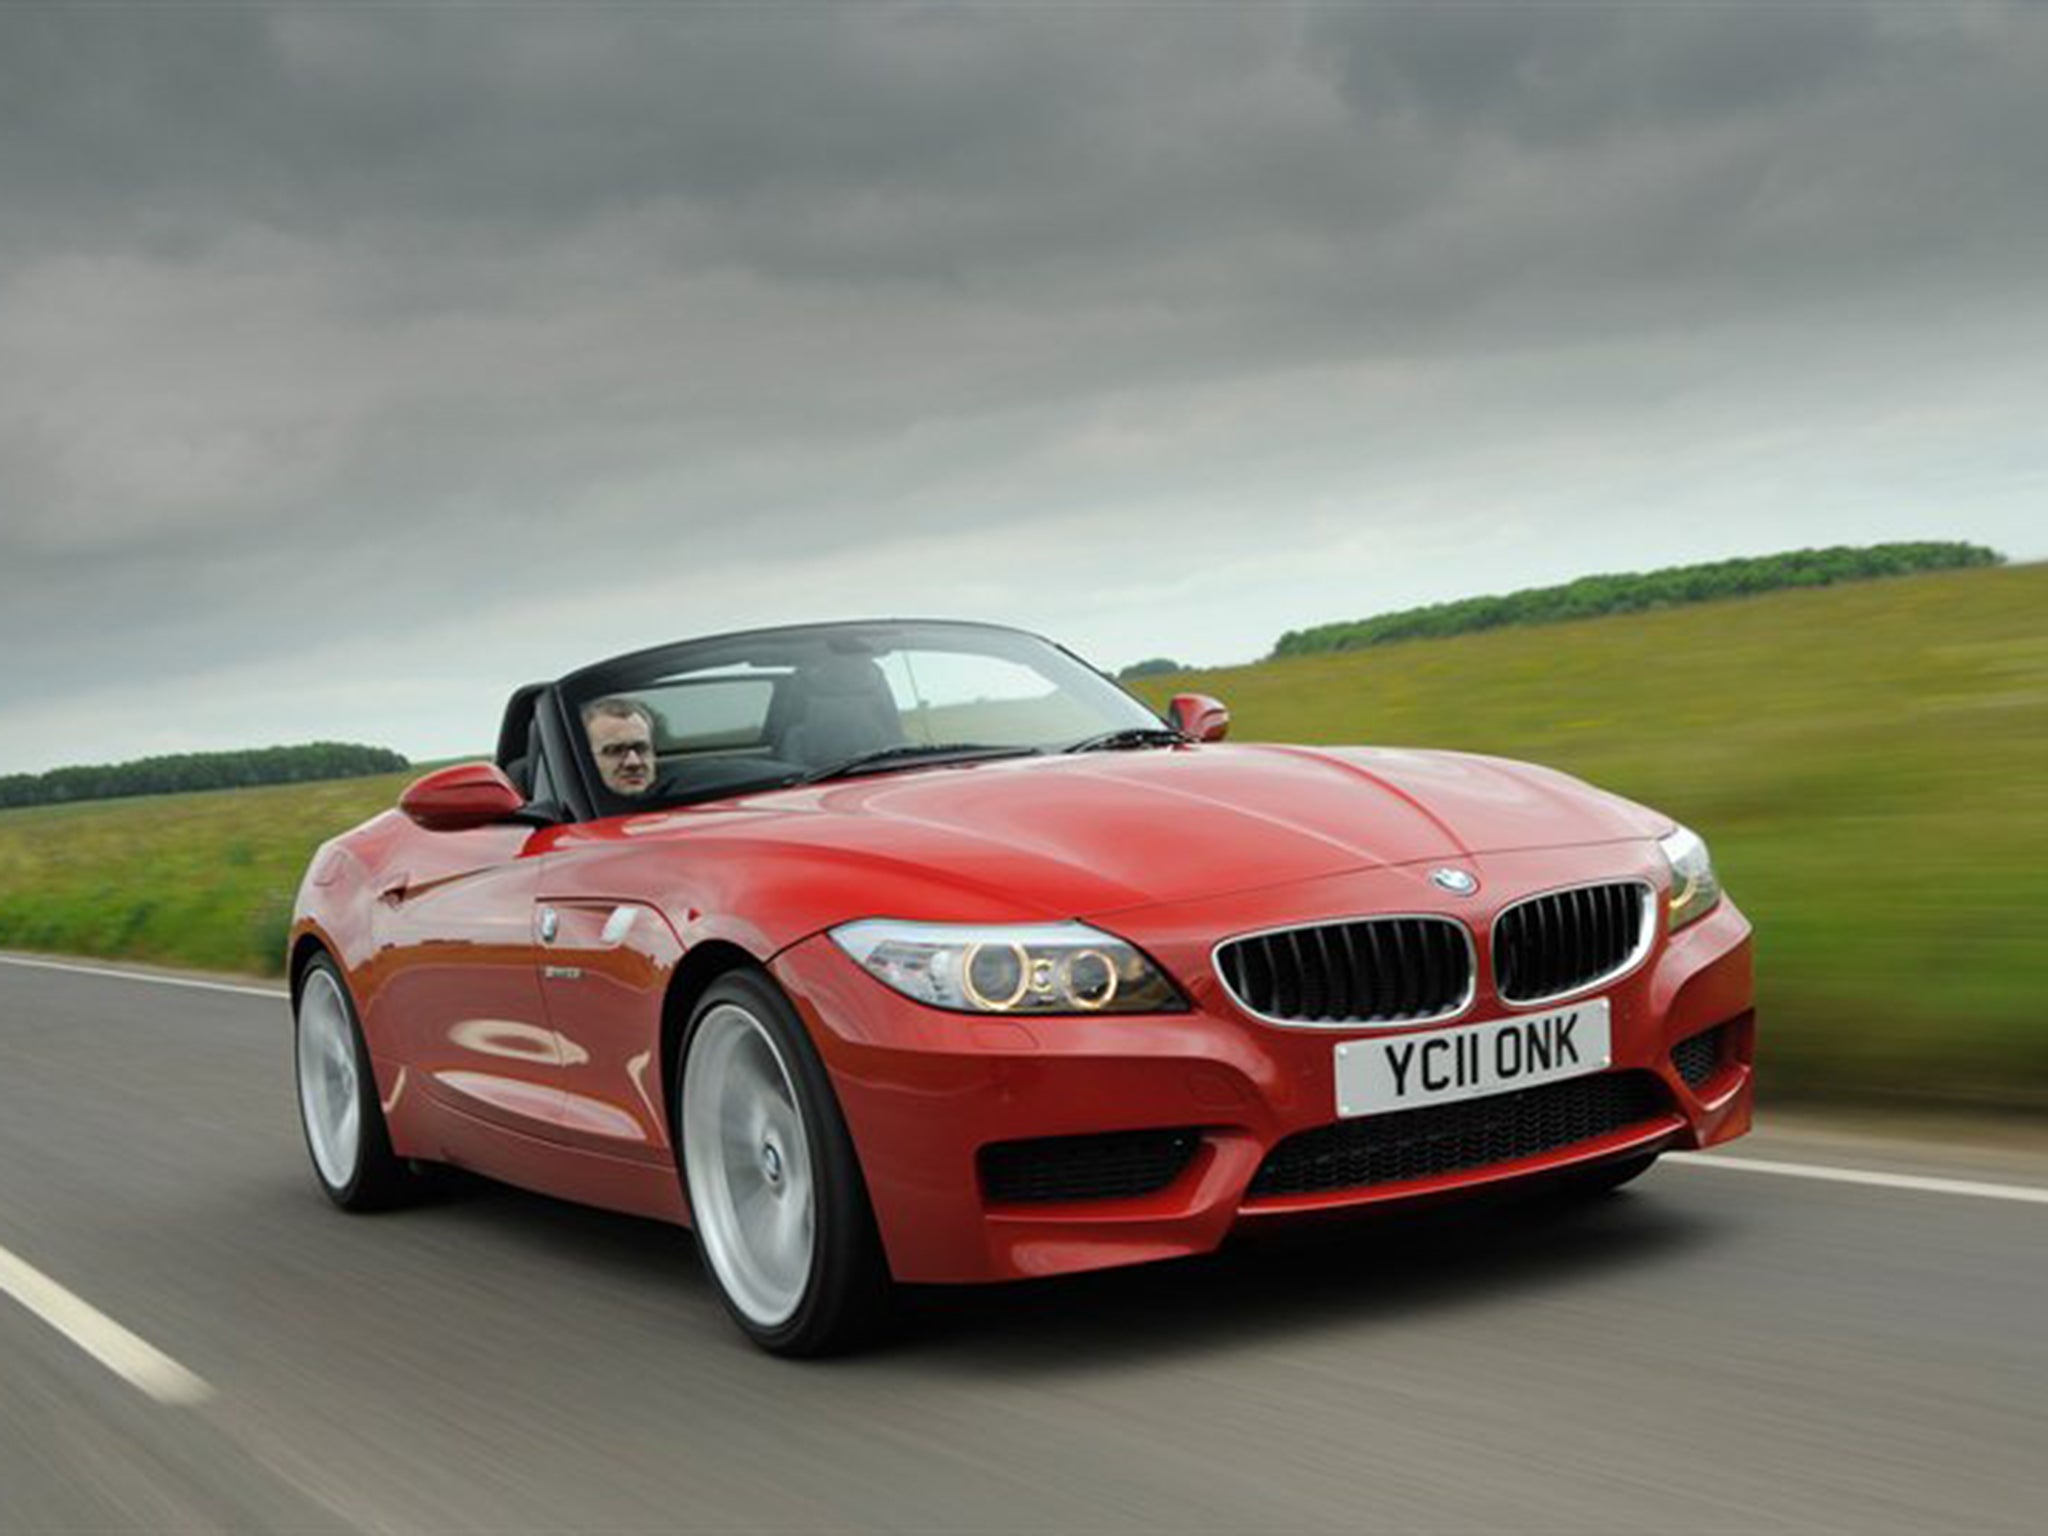 The Z4 is an entertaining drive that’ll get you plenty of admiring looks